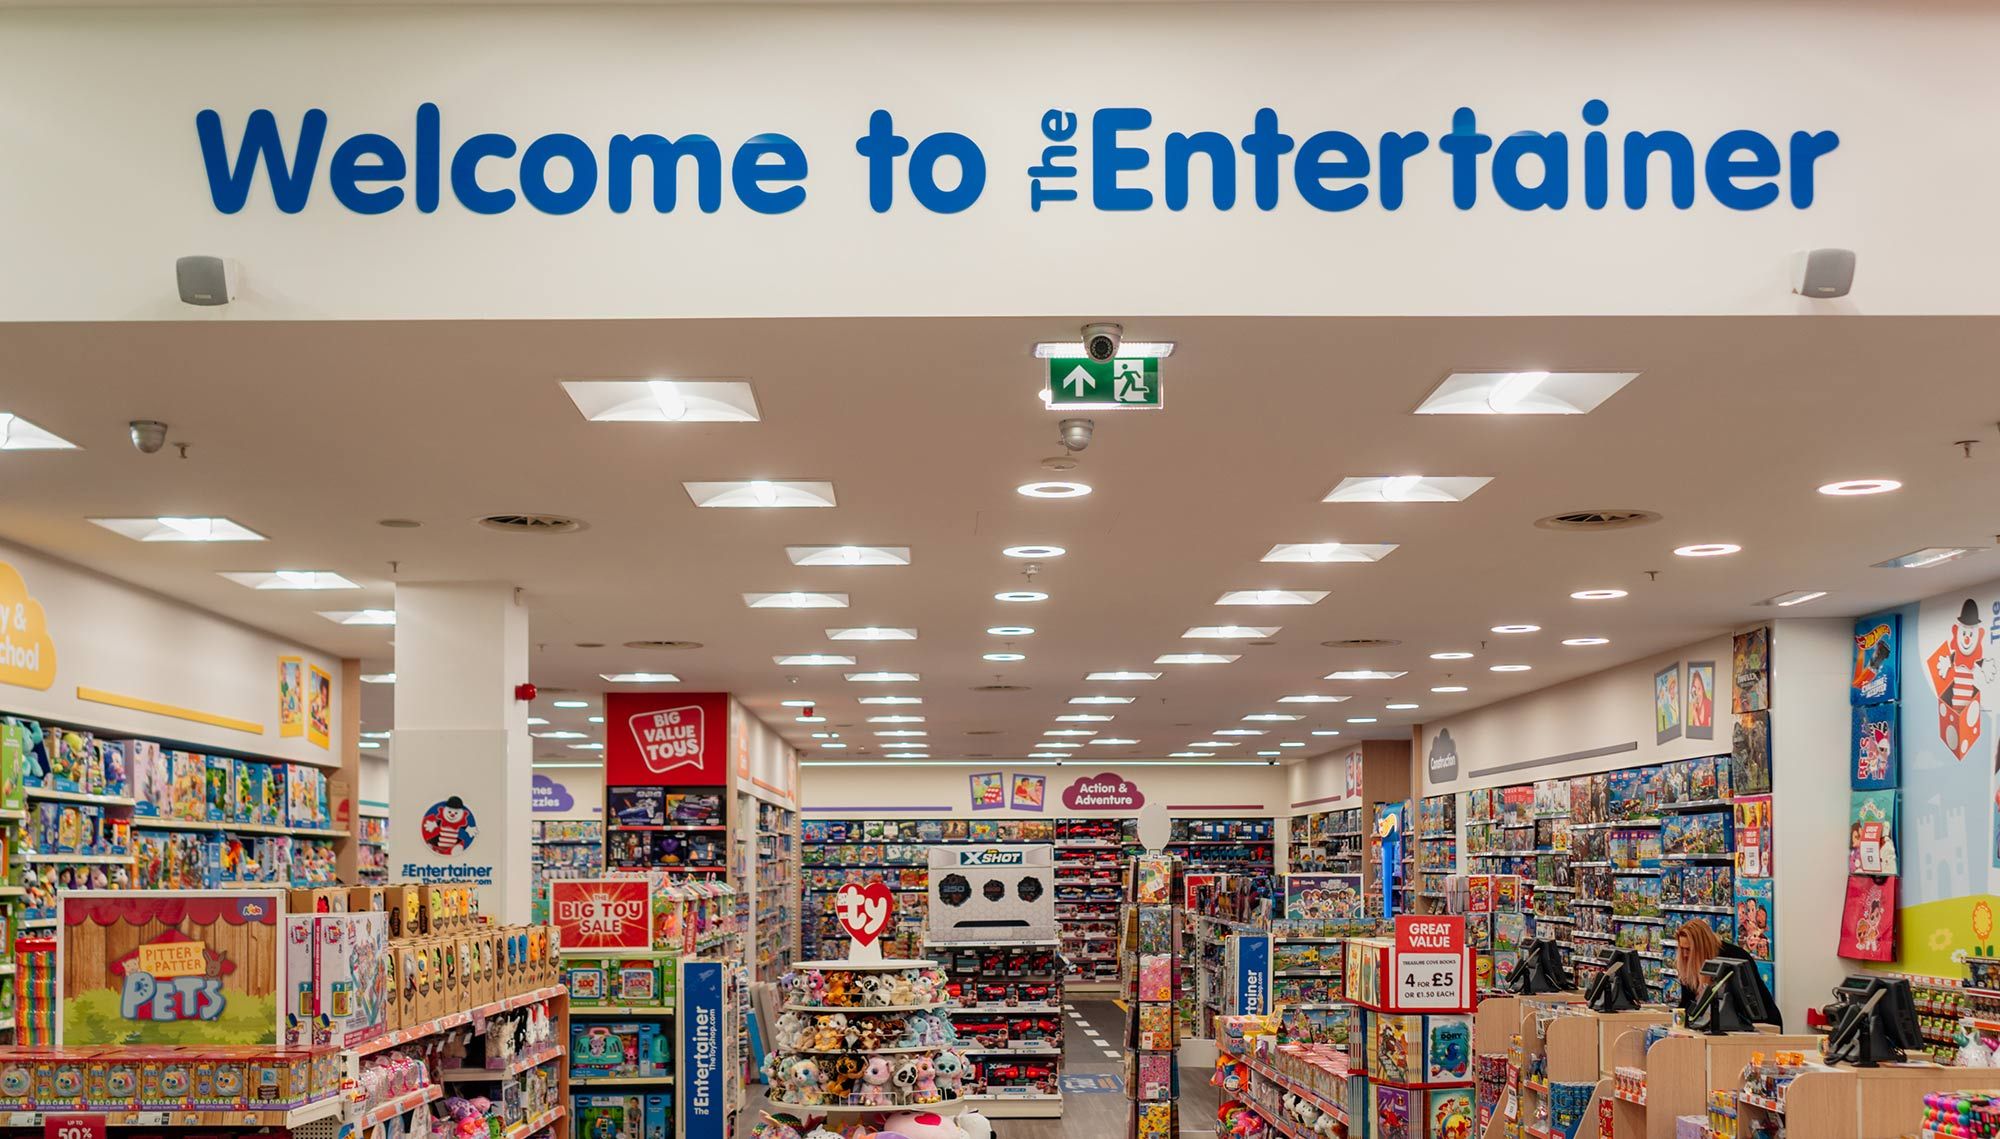 The Entertainer Store